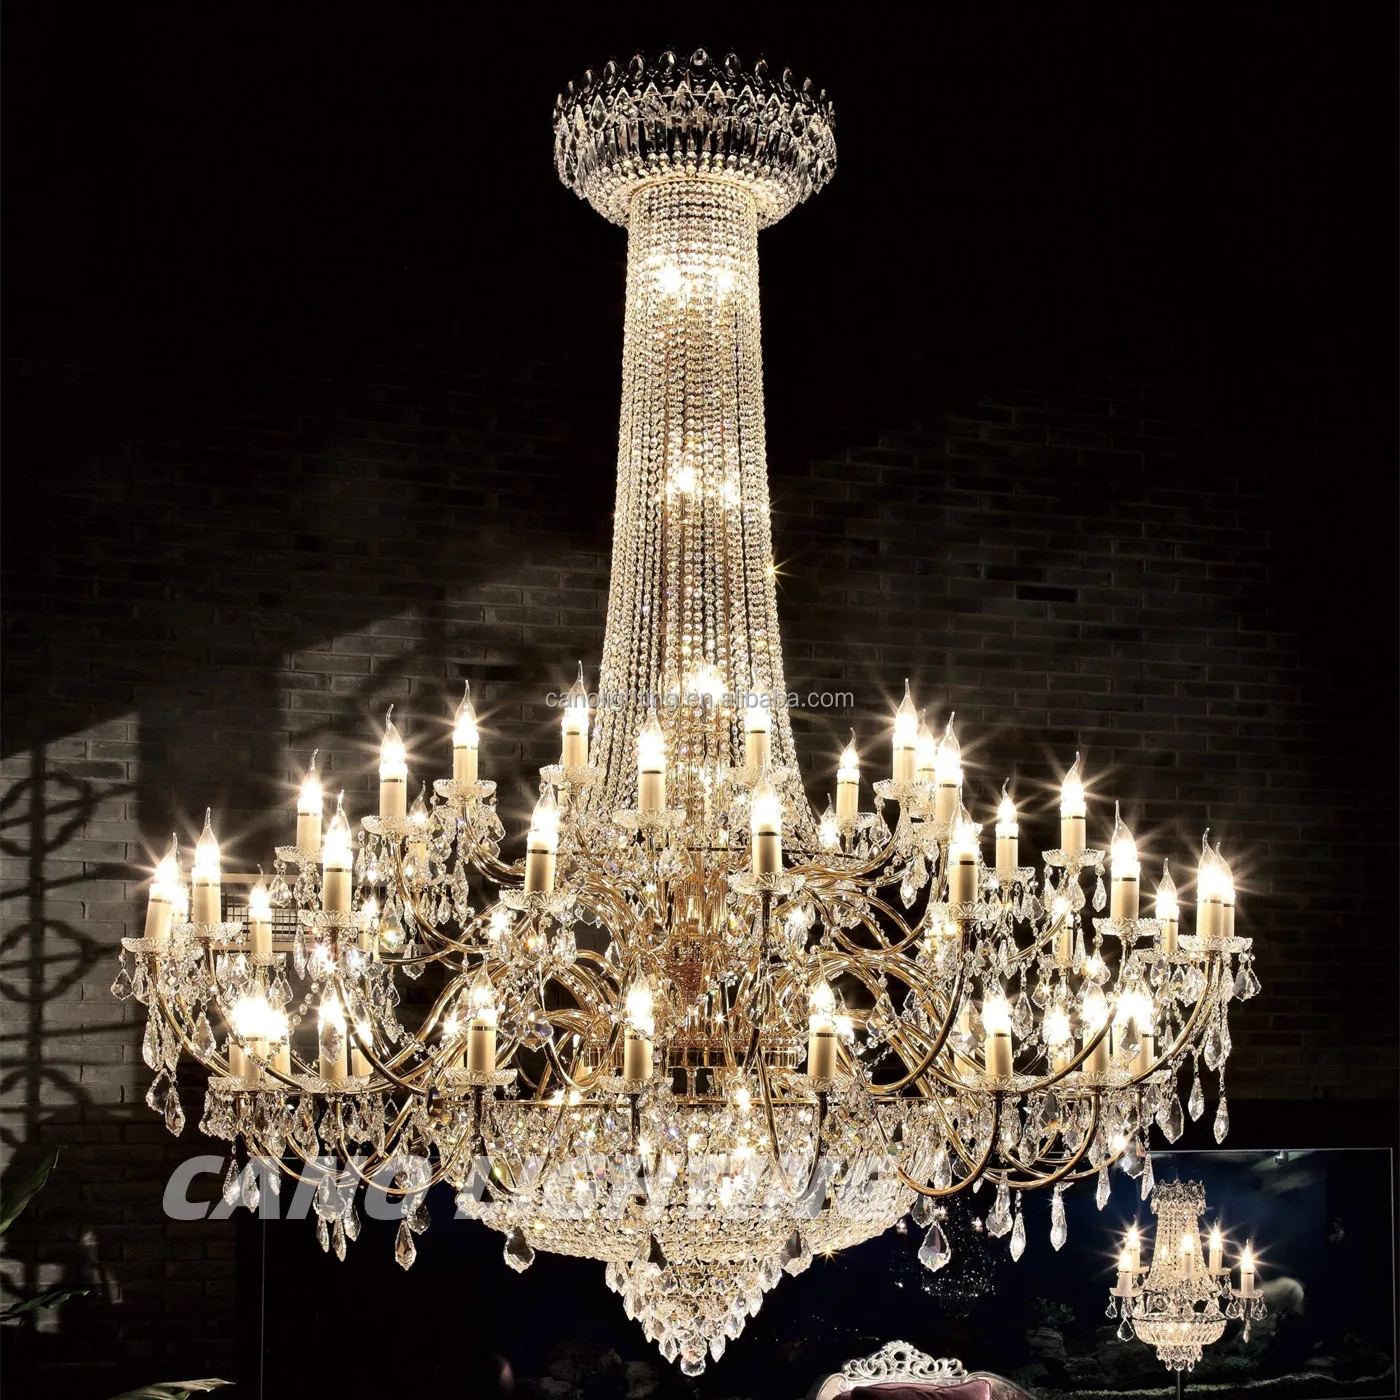 French Empire Wedding Crystal Chandelier Luxury Cristal Candles Pendant Lamp for Home Hotel Interior Decoration